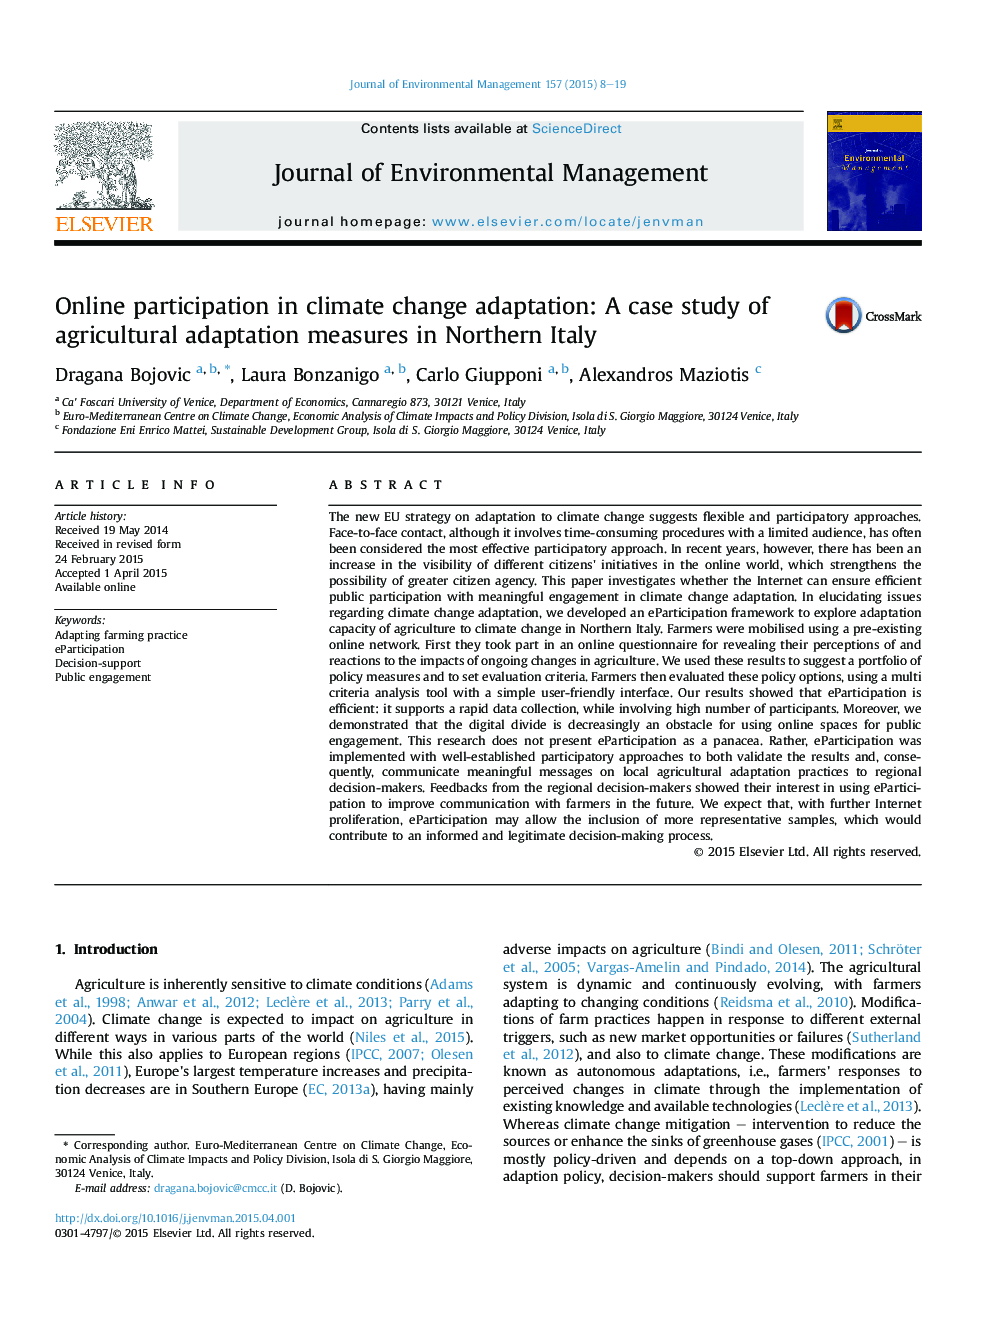 Online participation in climate change adaptation: A case study of agricultural adaptation measures in Northern Italy